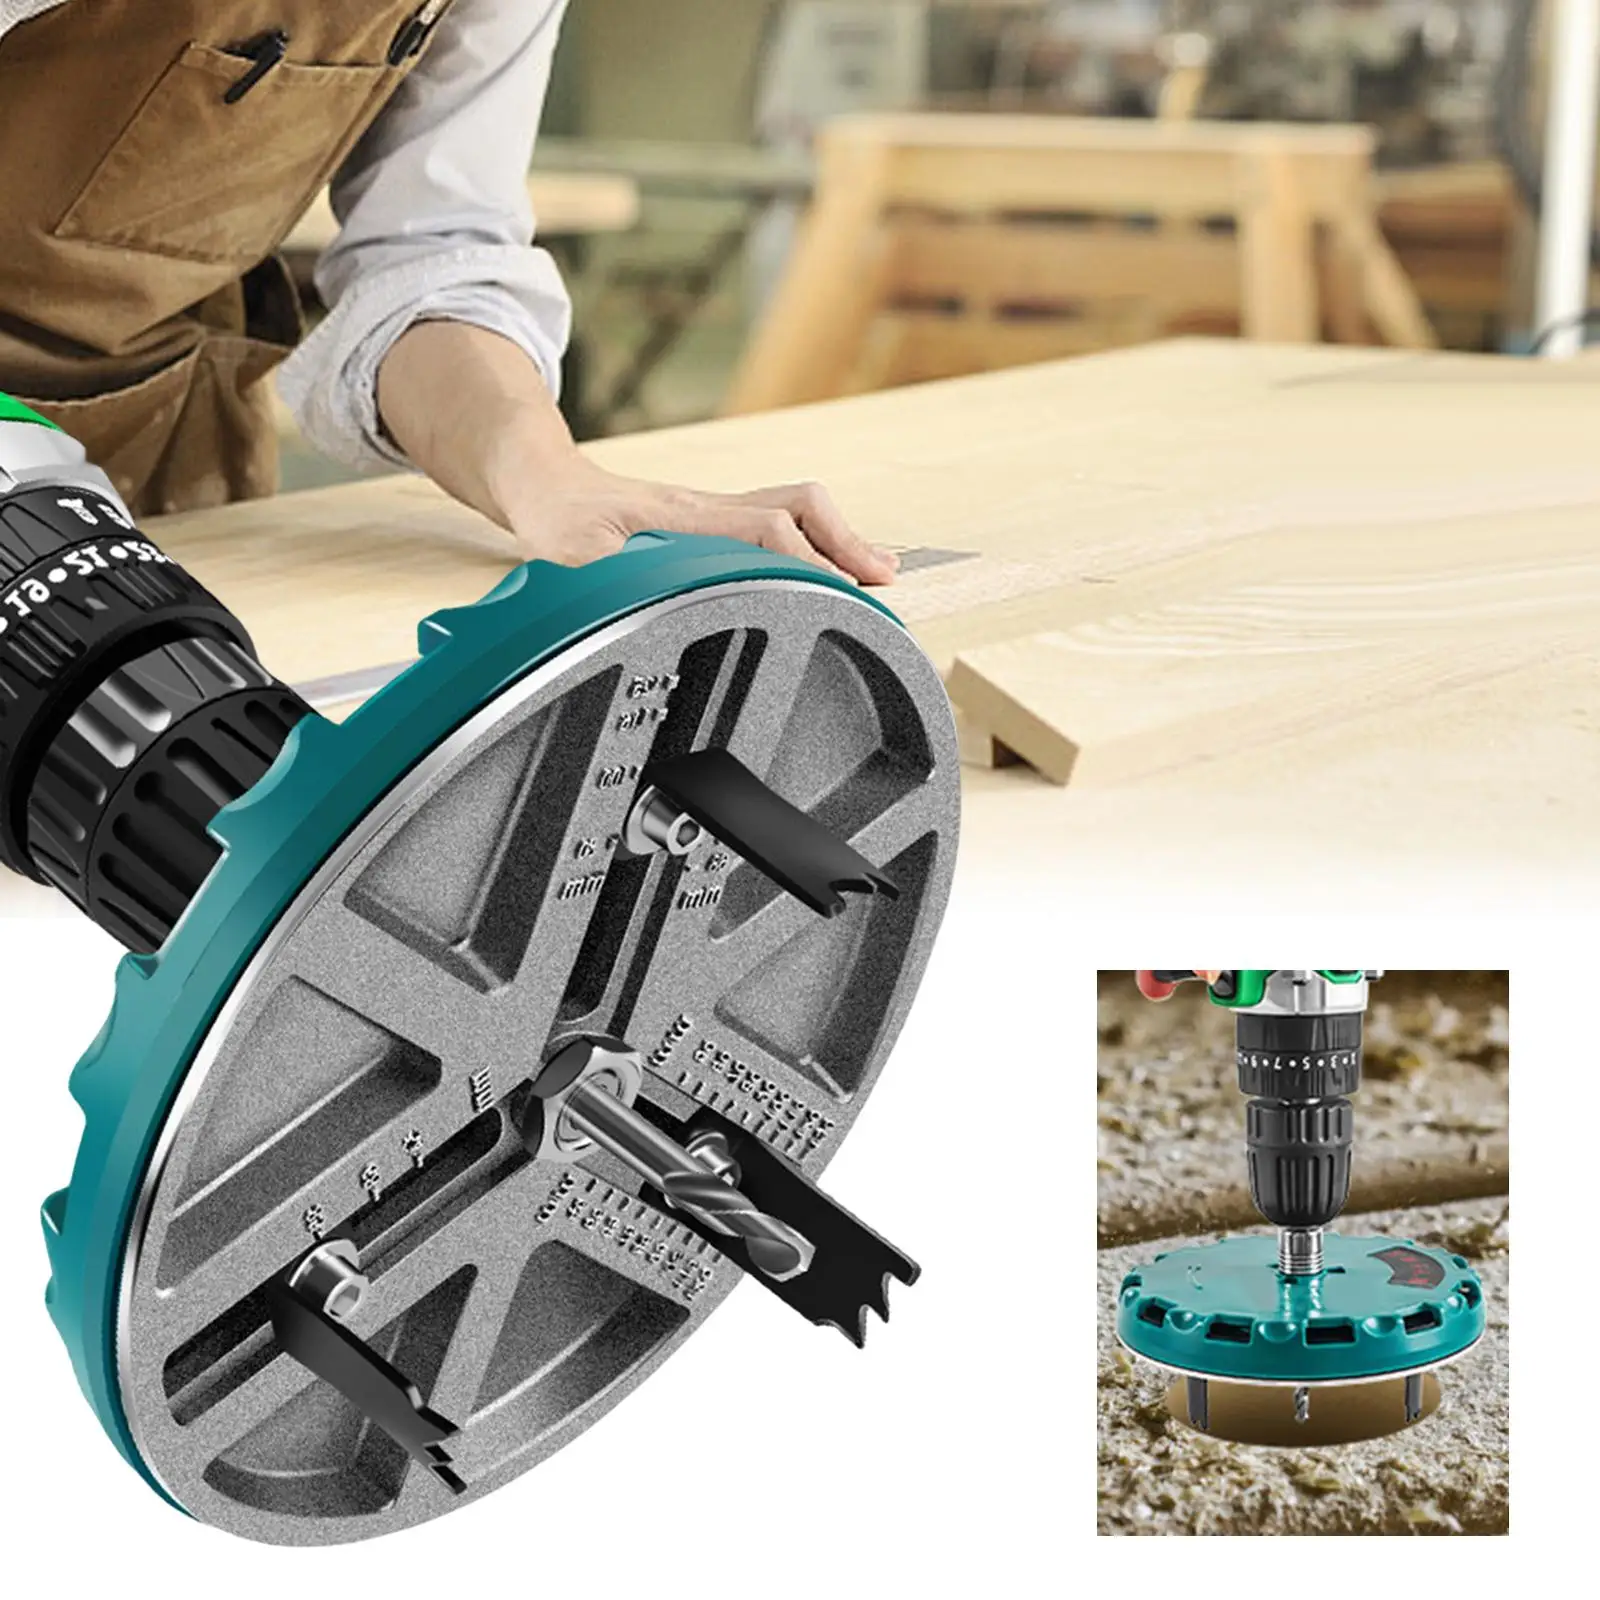 Adjustable Punching Saw Alloy Wood Hole Positioning Punching Self Centering Dowel Bit Dowel Drill Guide Jig for Drywall